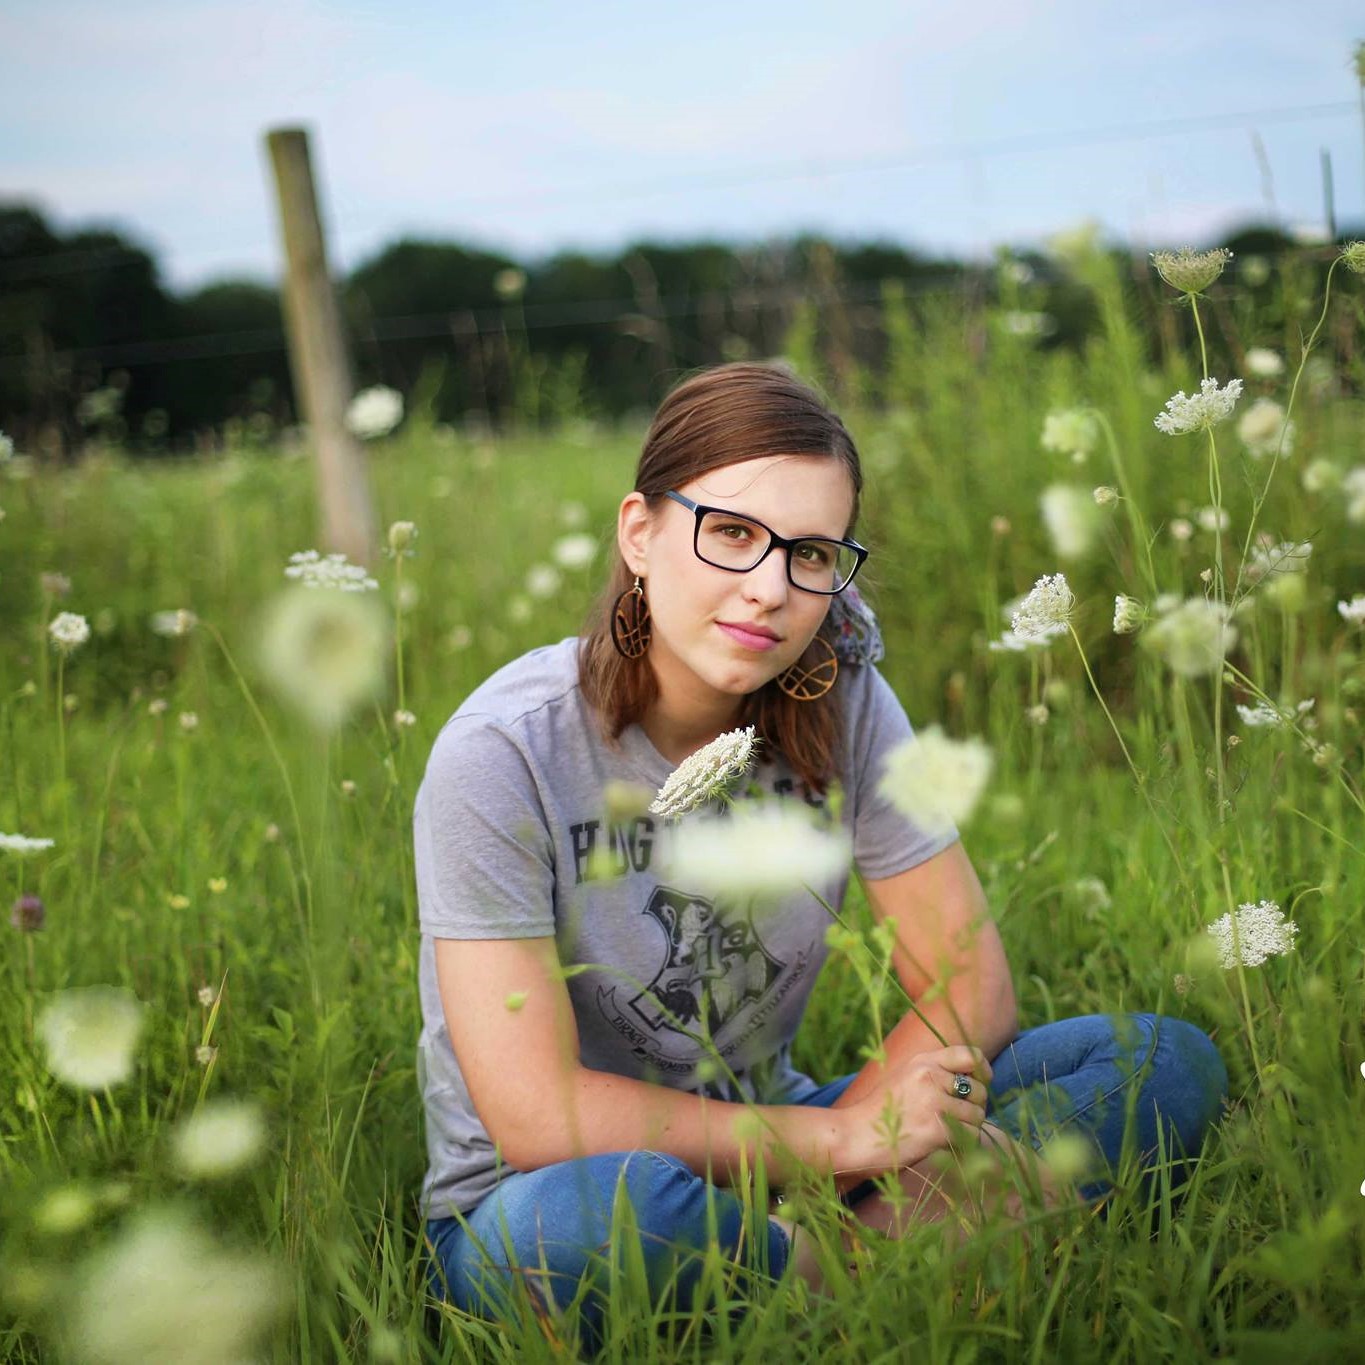 A woman sits in tall grass and flowers. She is wearing glasses and a gray tshirt.